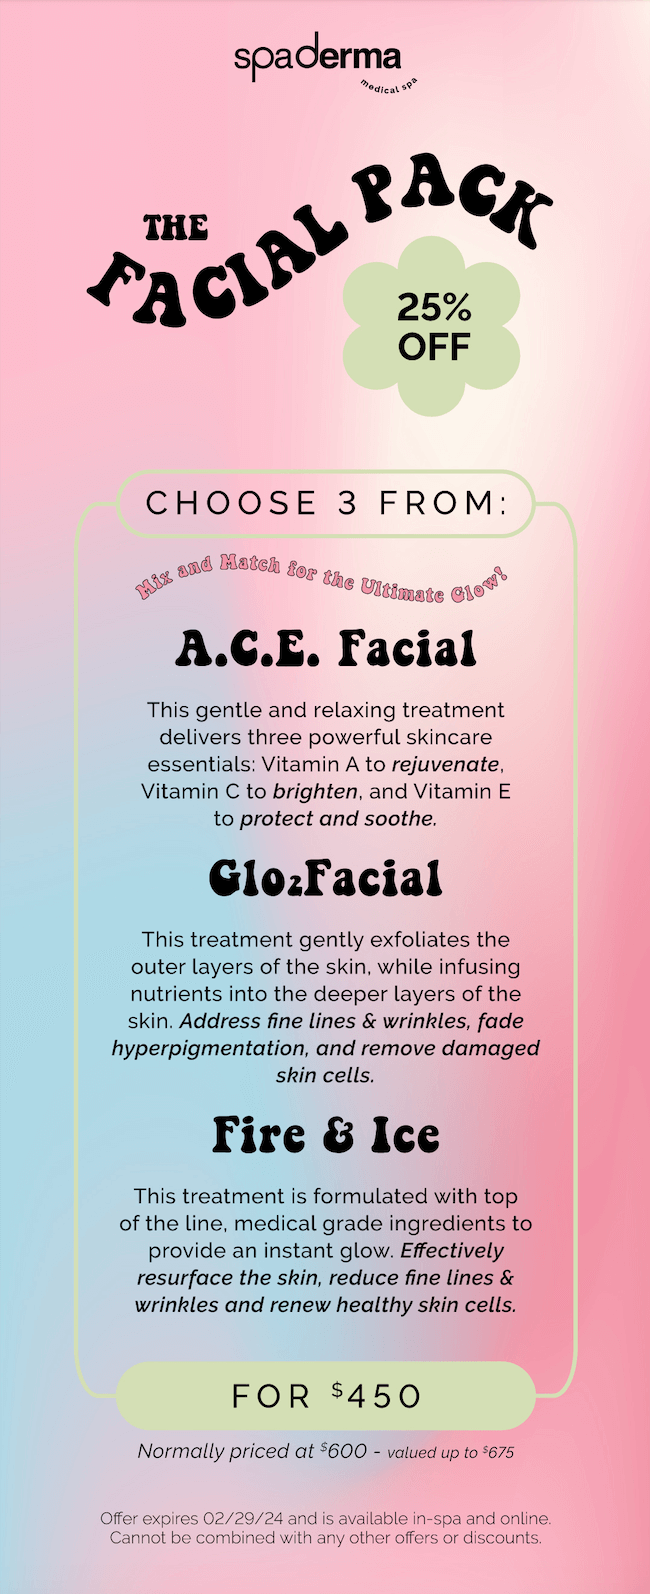 Receive 25% off of the all new Facial Pack! Mix and match your choice of A.C.E. Facial, Glo2Facial, and Fire & Ice!